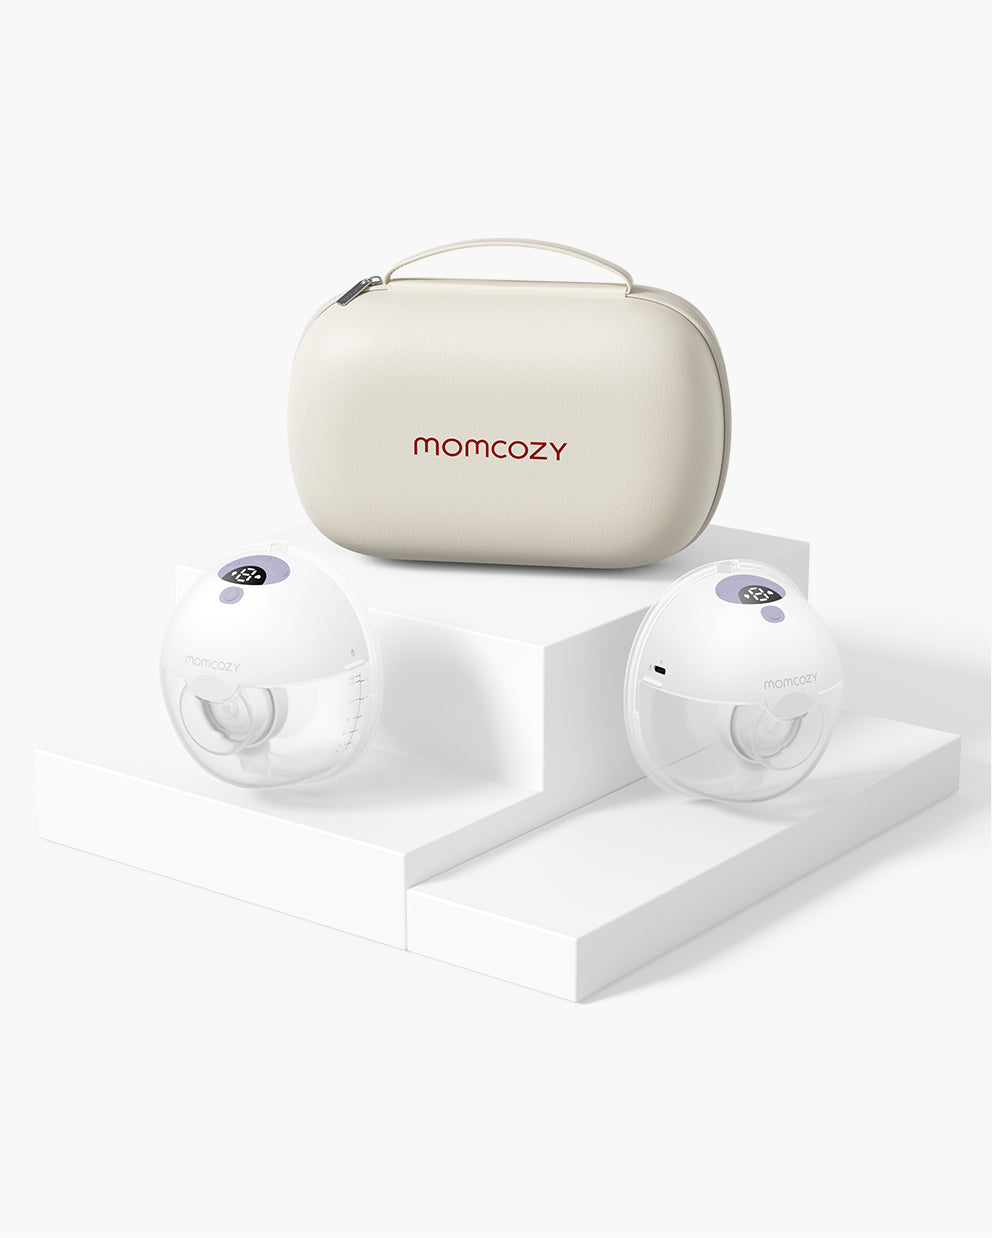 Momcozy 3-in-1 Kneading Lactation Massager Rose MCELM02-CV00BA-WY - Best Buy